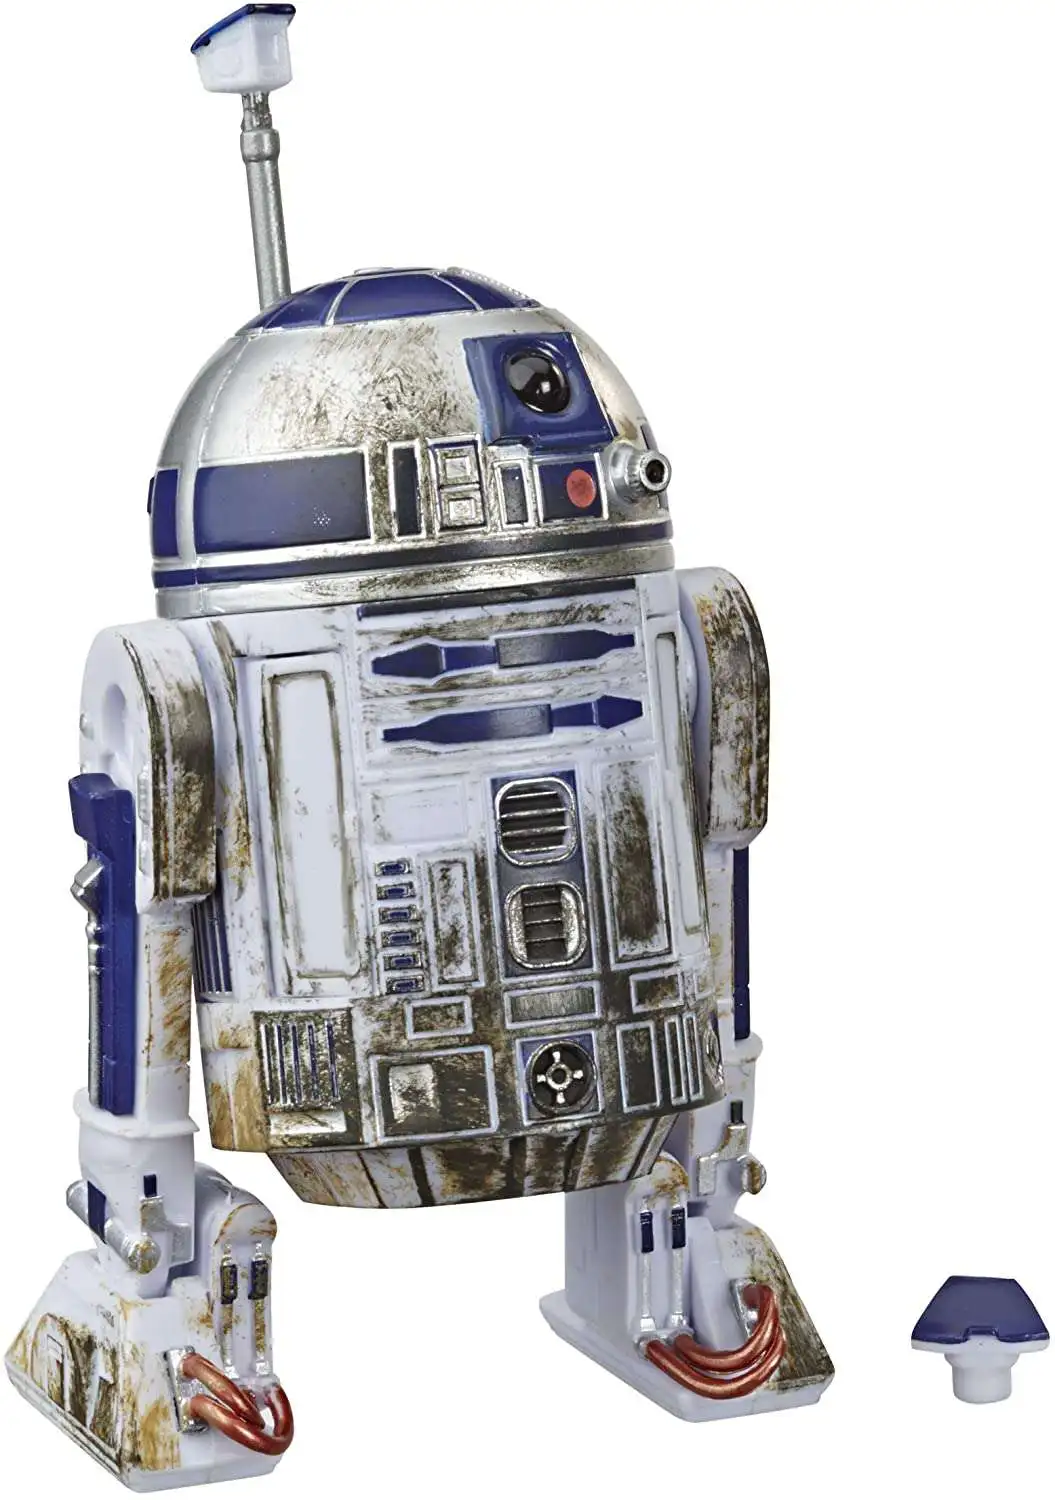 40th anniversary star wars R2D2 figure! Collectible Star Wars Figures 